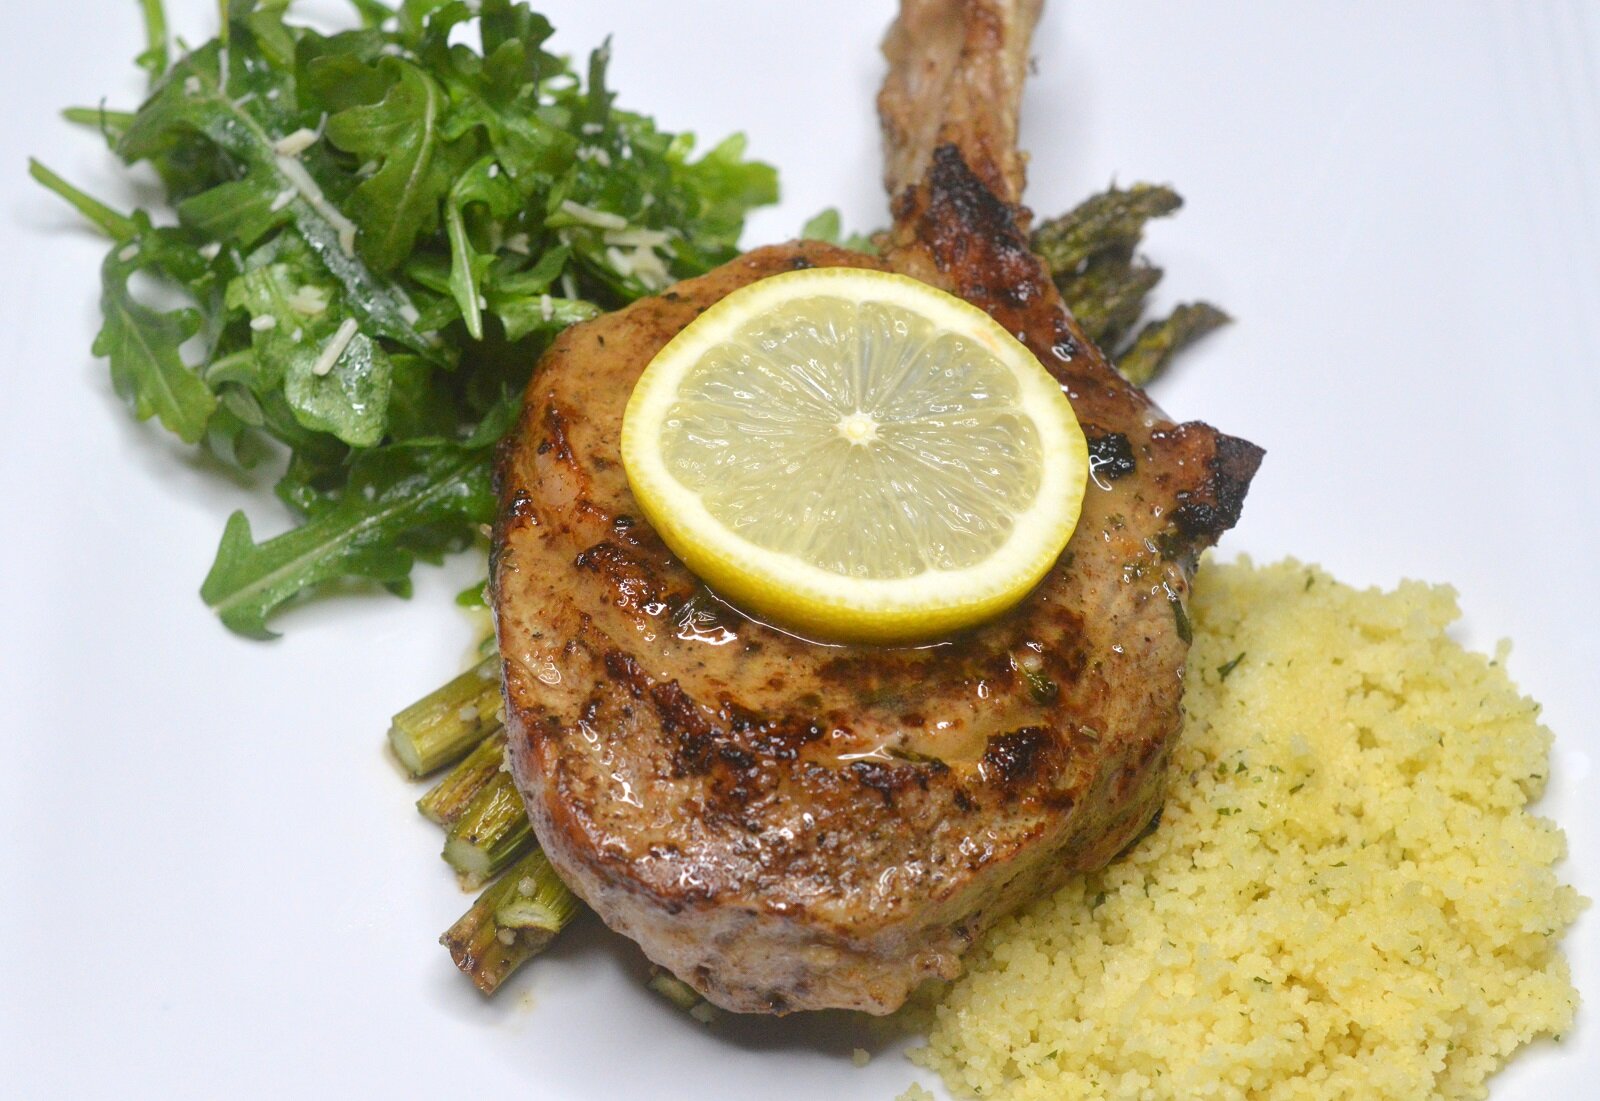 Pan seared veal chops with a side of arugula and rice topped with a slice of lemon.